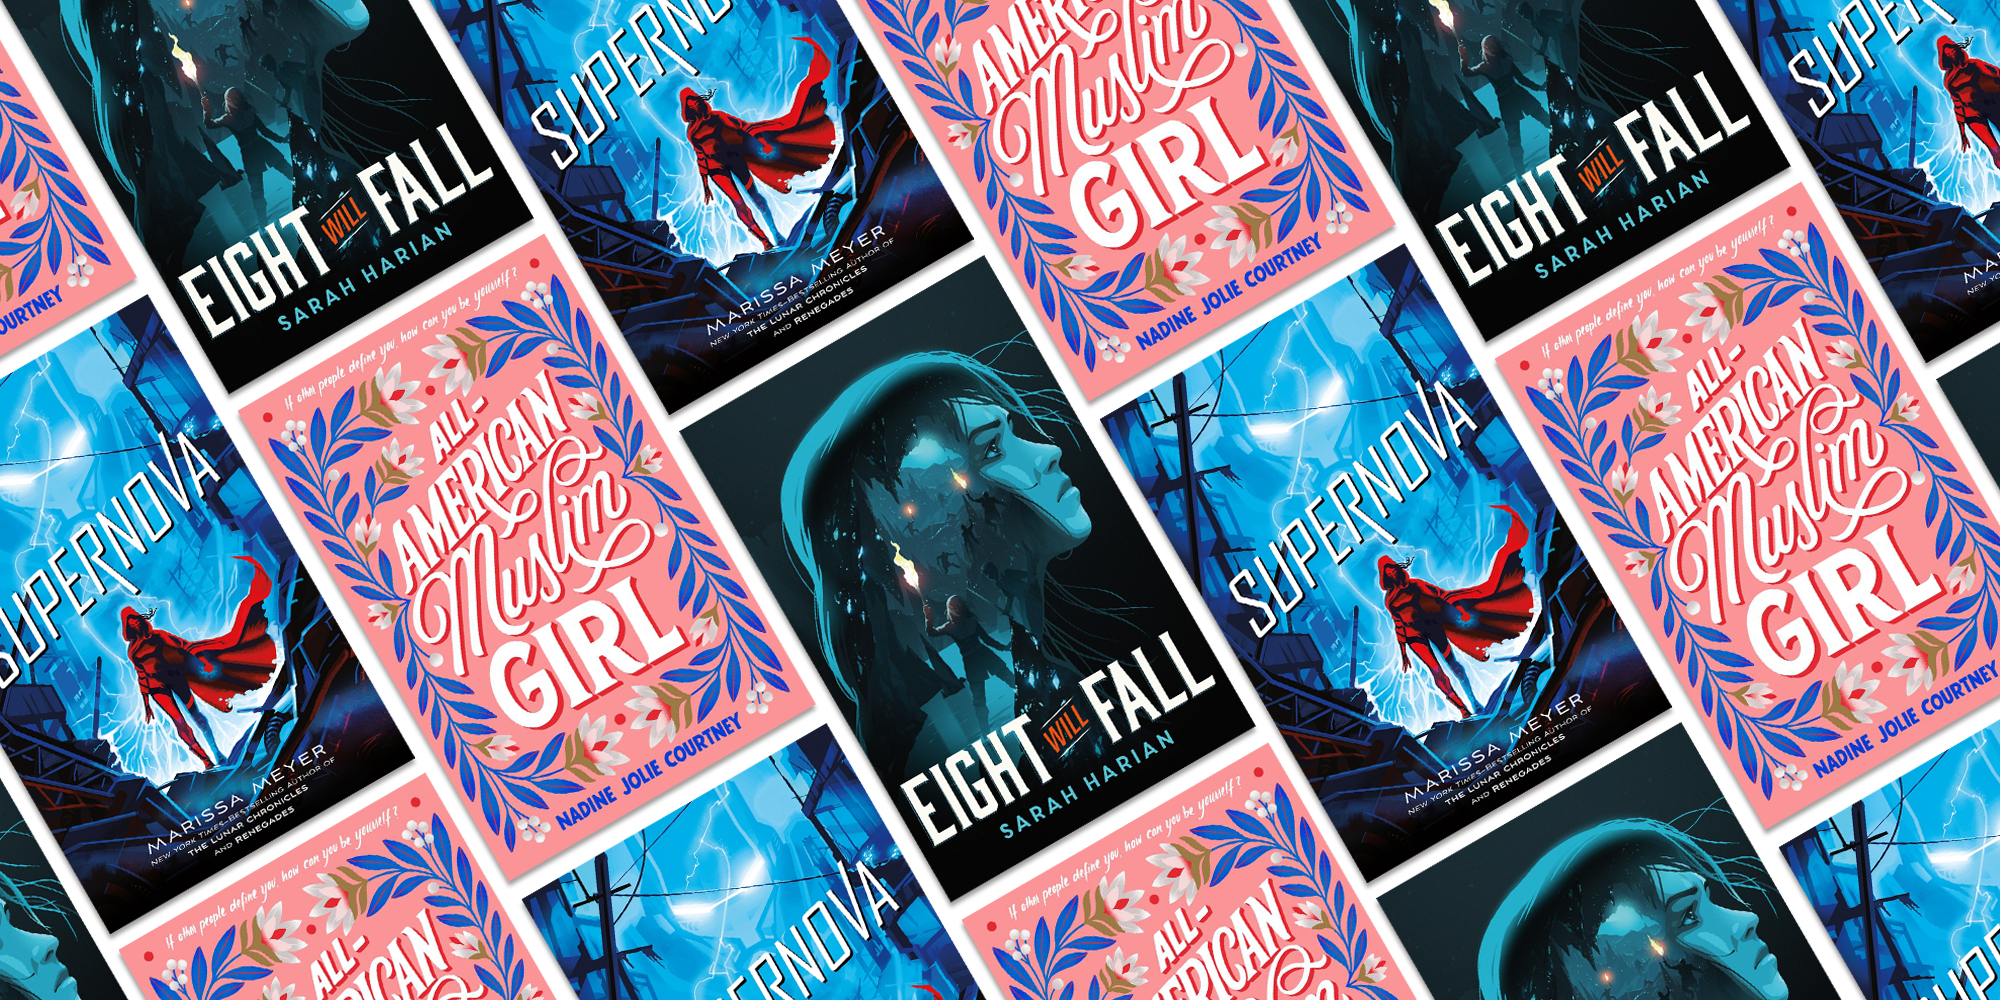 3 Incredible New Books to Add to Your TBR this November